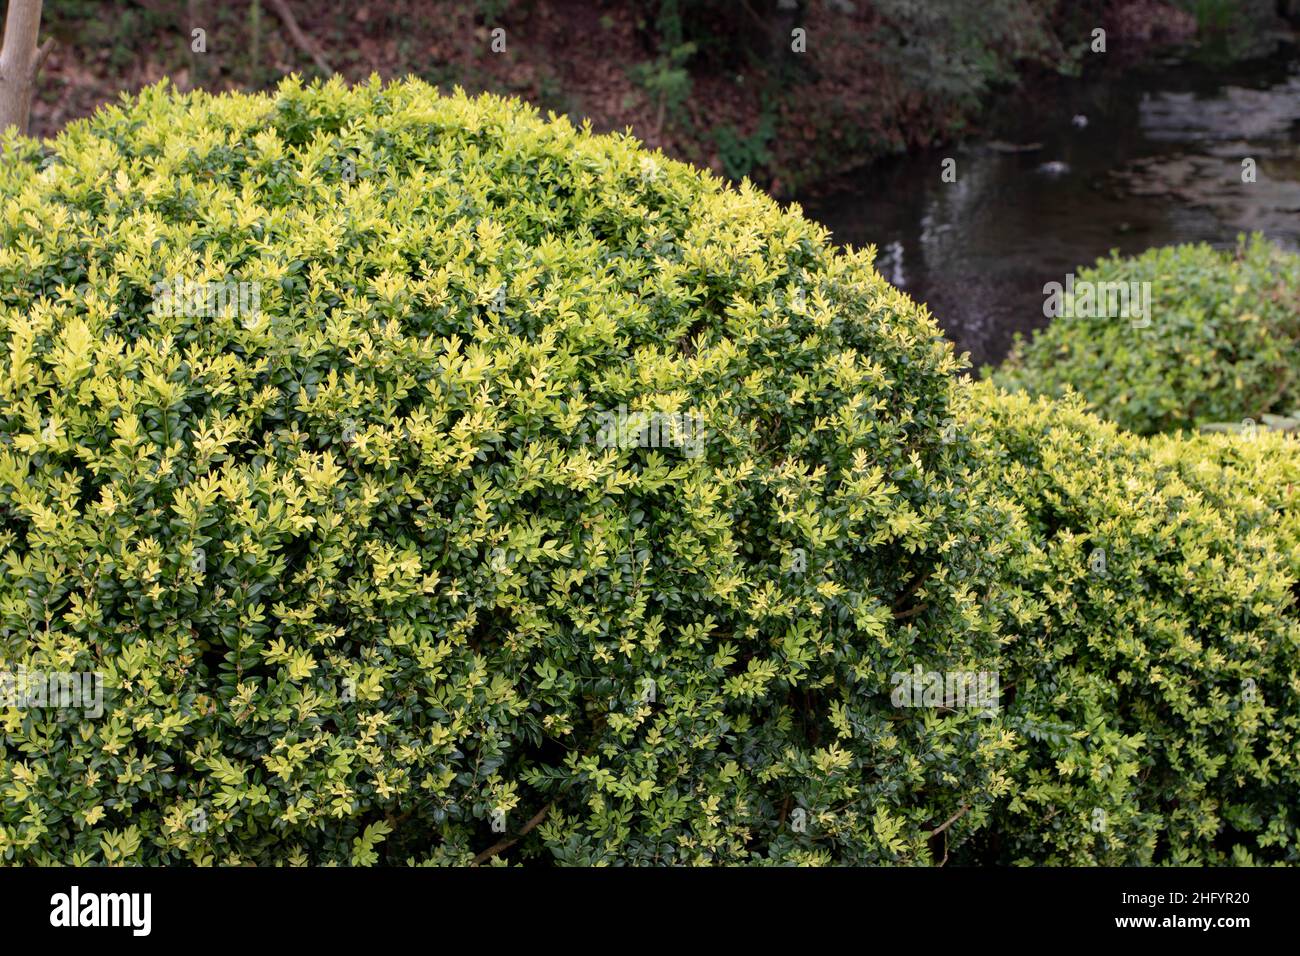 Common box, European box, or boxwood evergreen pruned shrub in the garden. Buxus sempervirens topiary. Variegated cultivar. Stock Photo